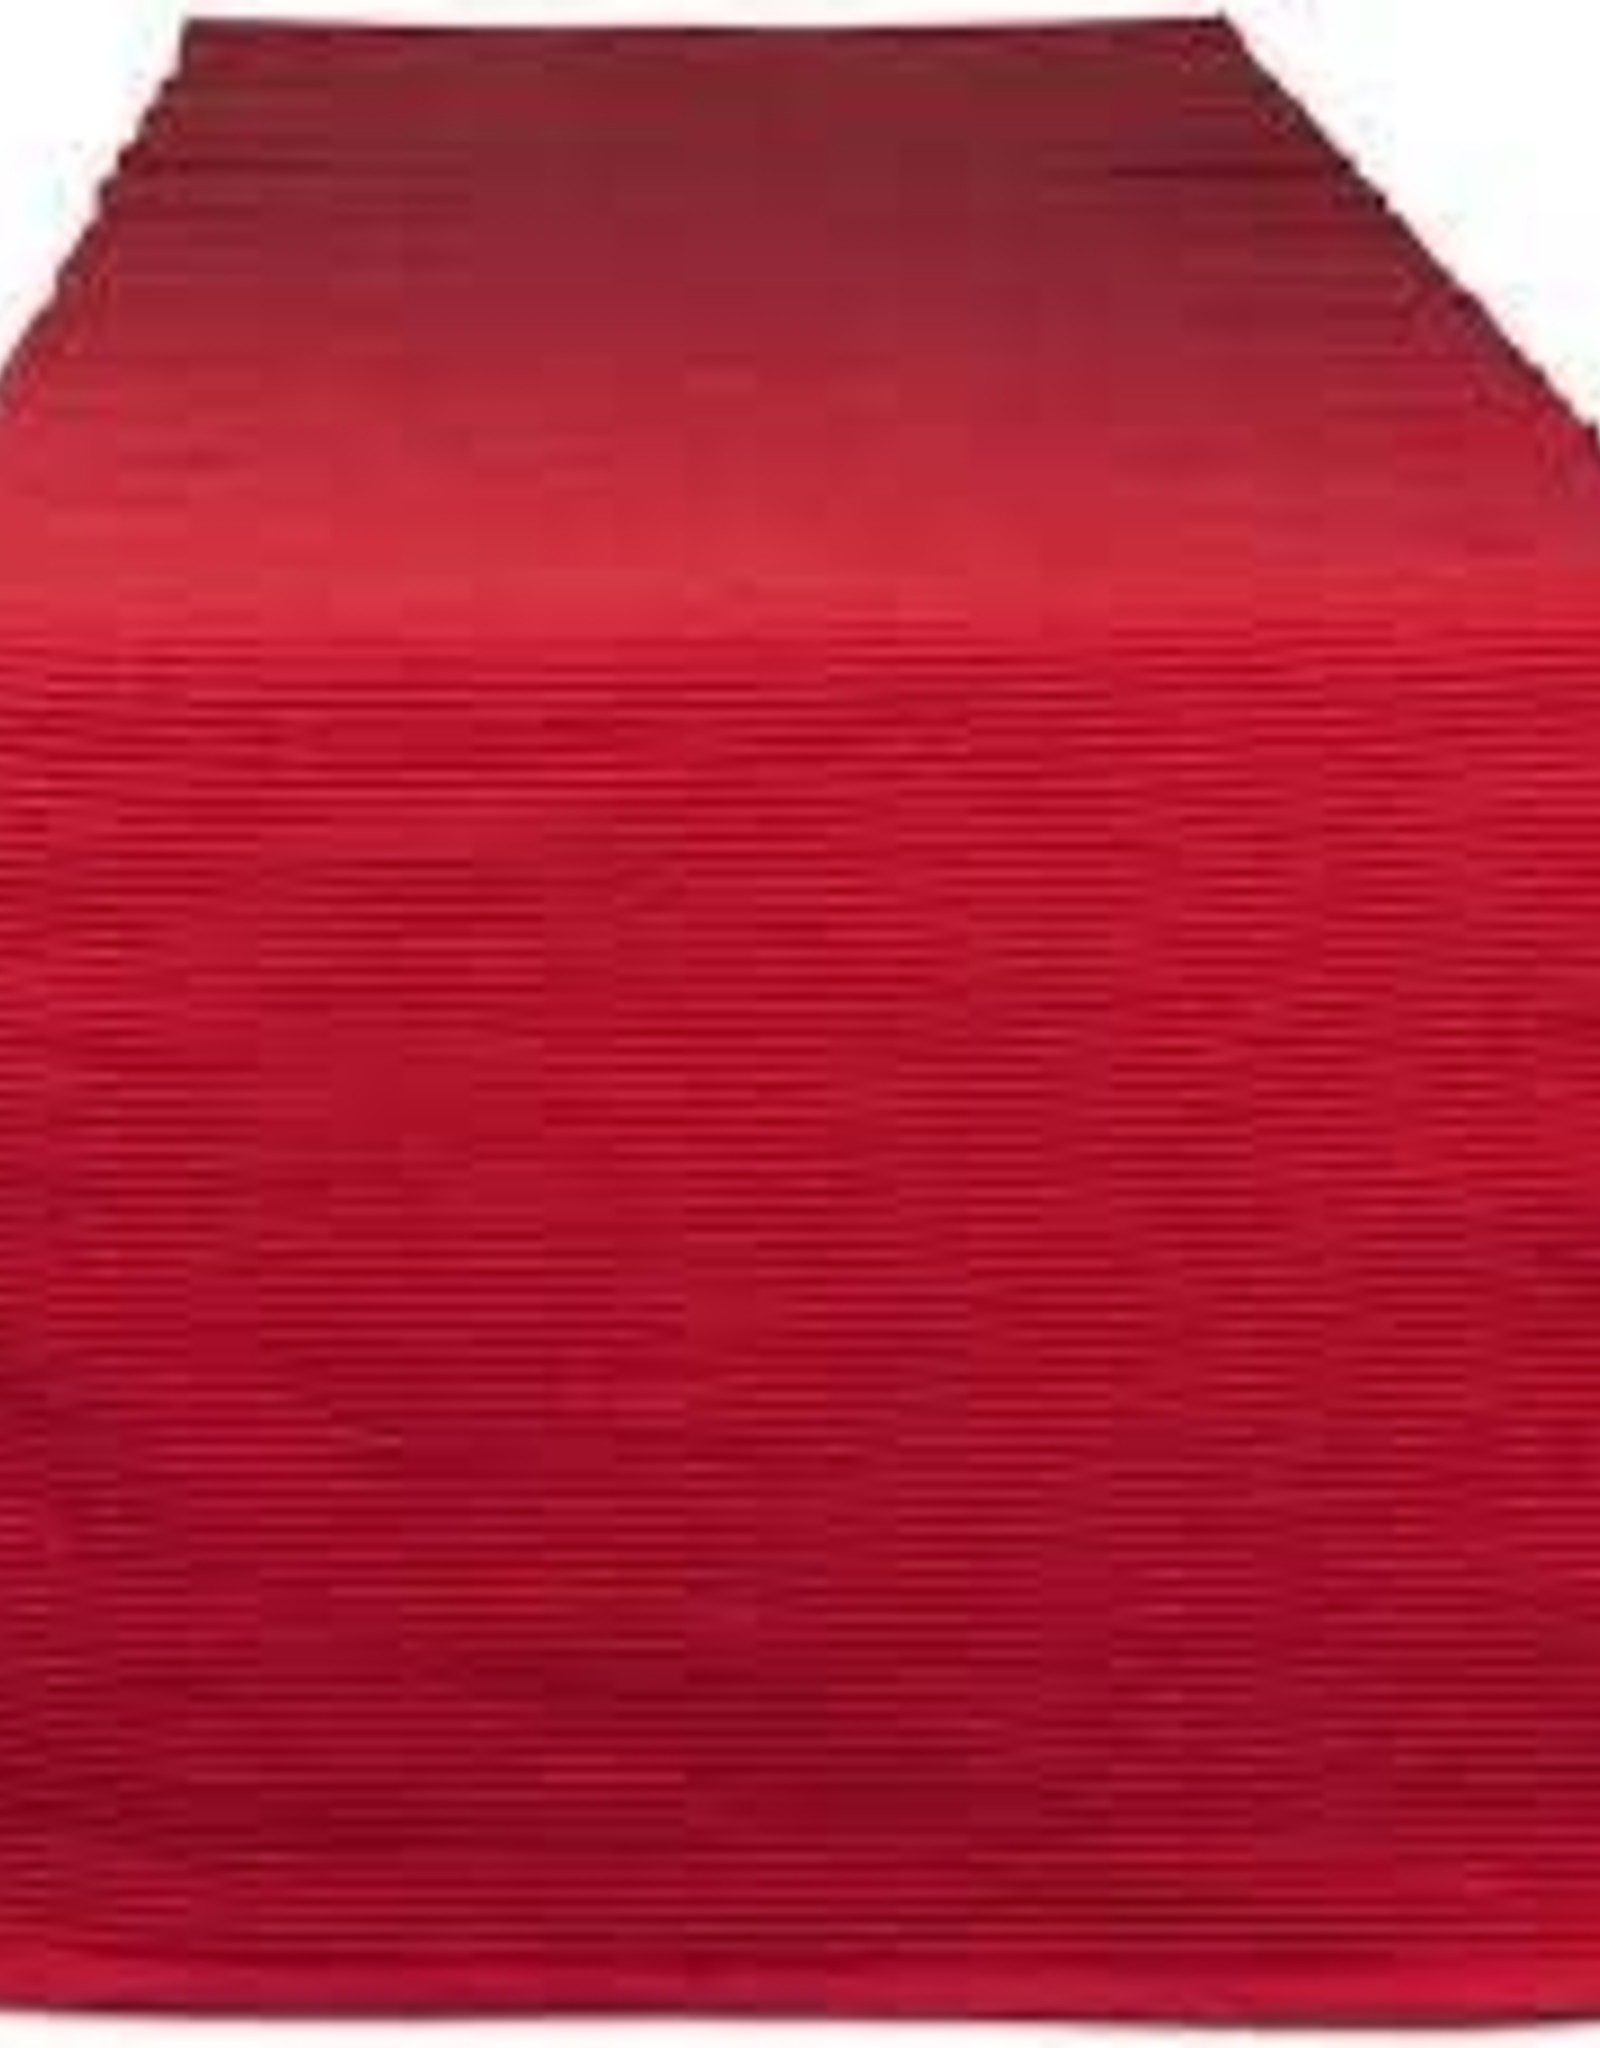 751089 TANGO RED TABLE RUNNER 13 x 72